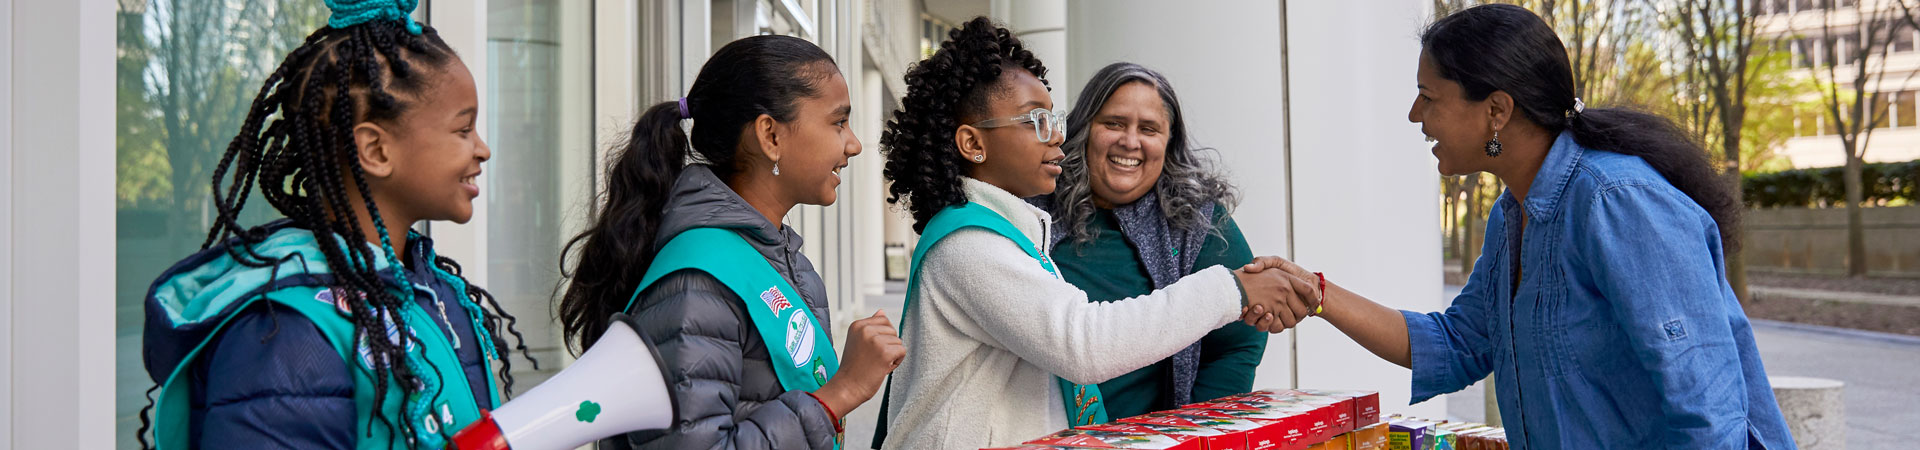  A young adult in a jean shirt shakes the hand of a Girl Scout behind a table stacked with Girl Scout cookies. 